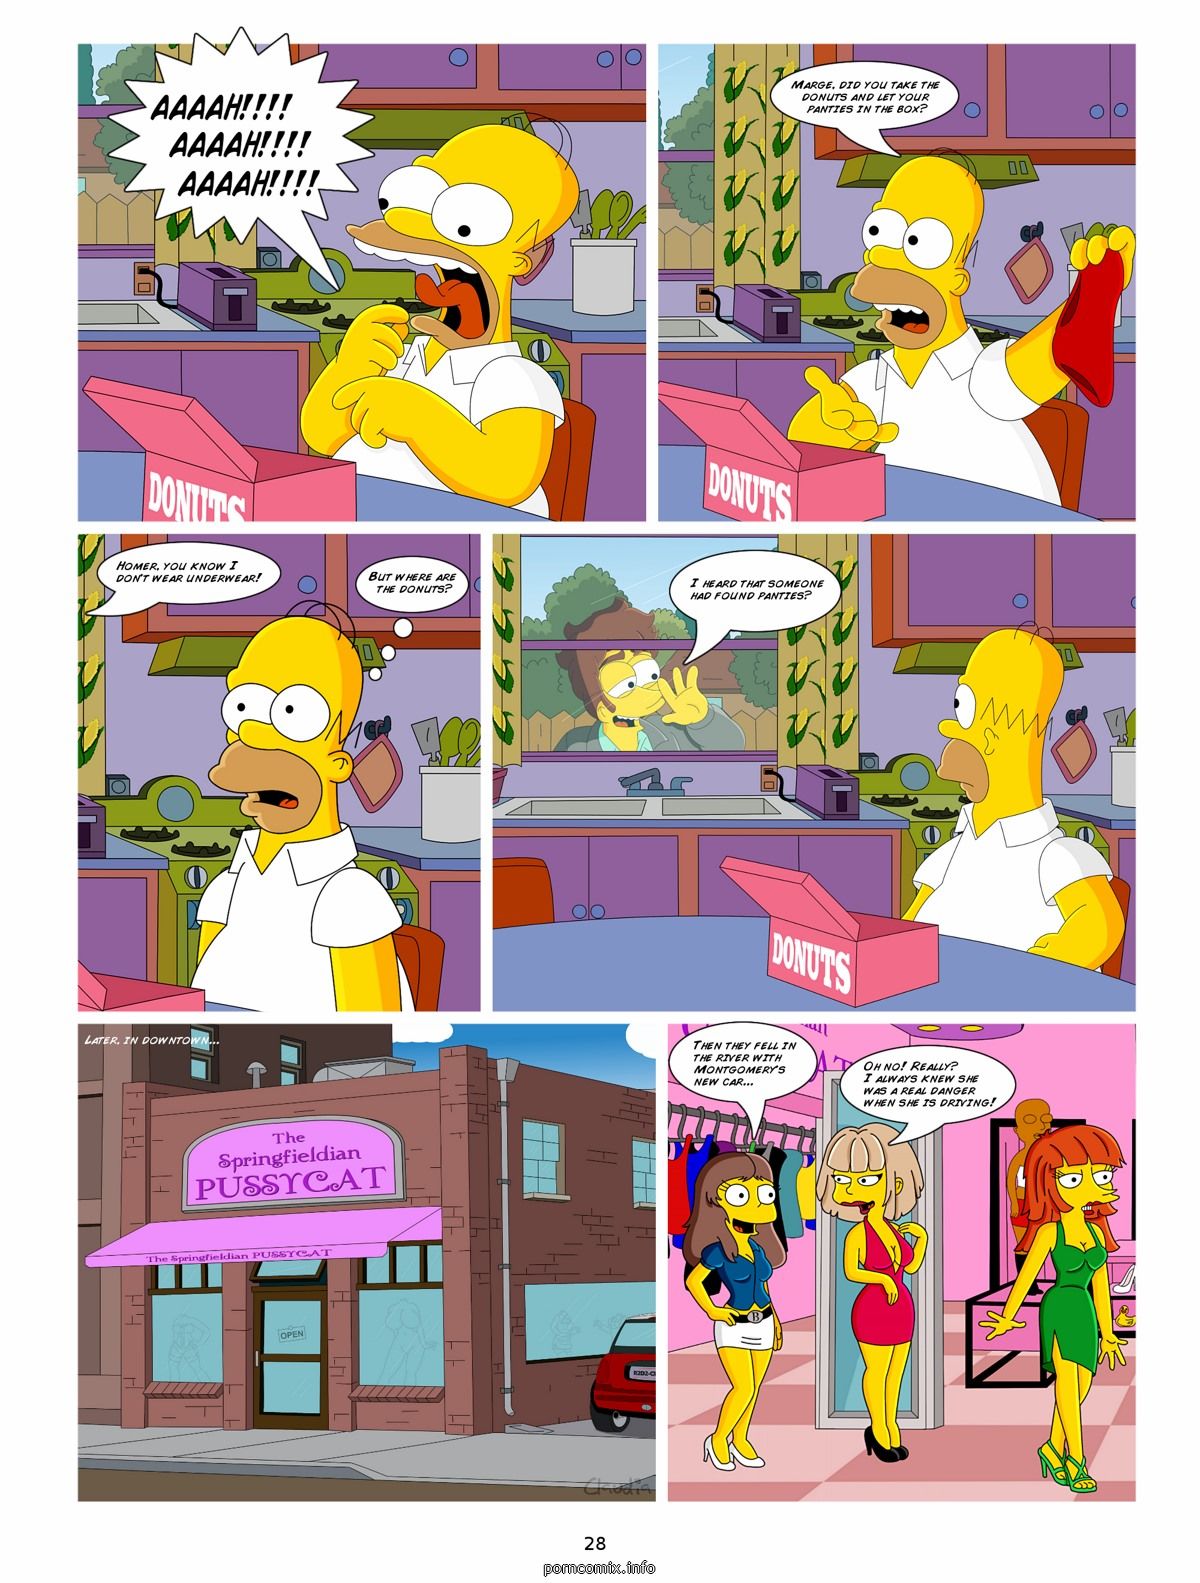 [Claudia] The Simpsons - Road To Springfield page 29